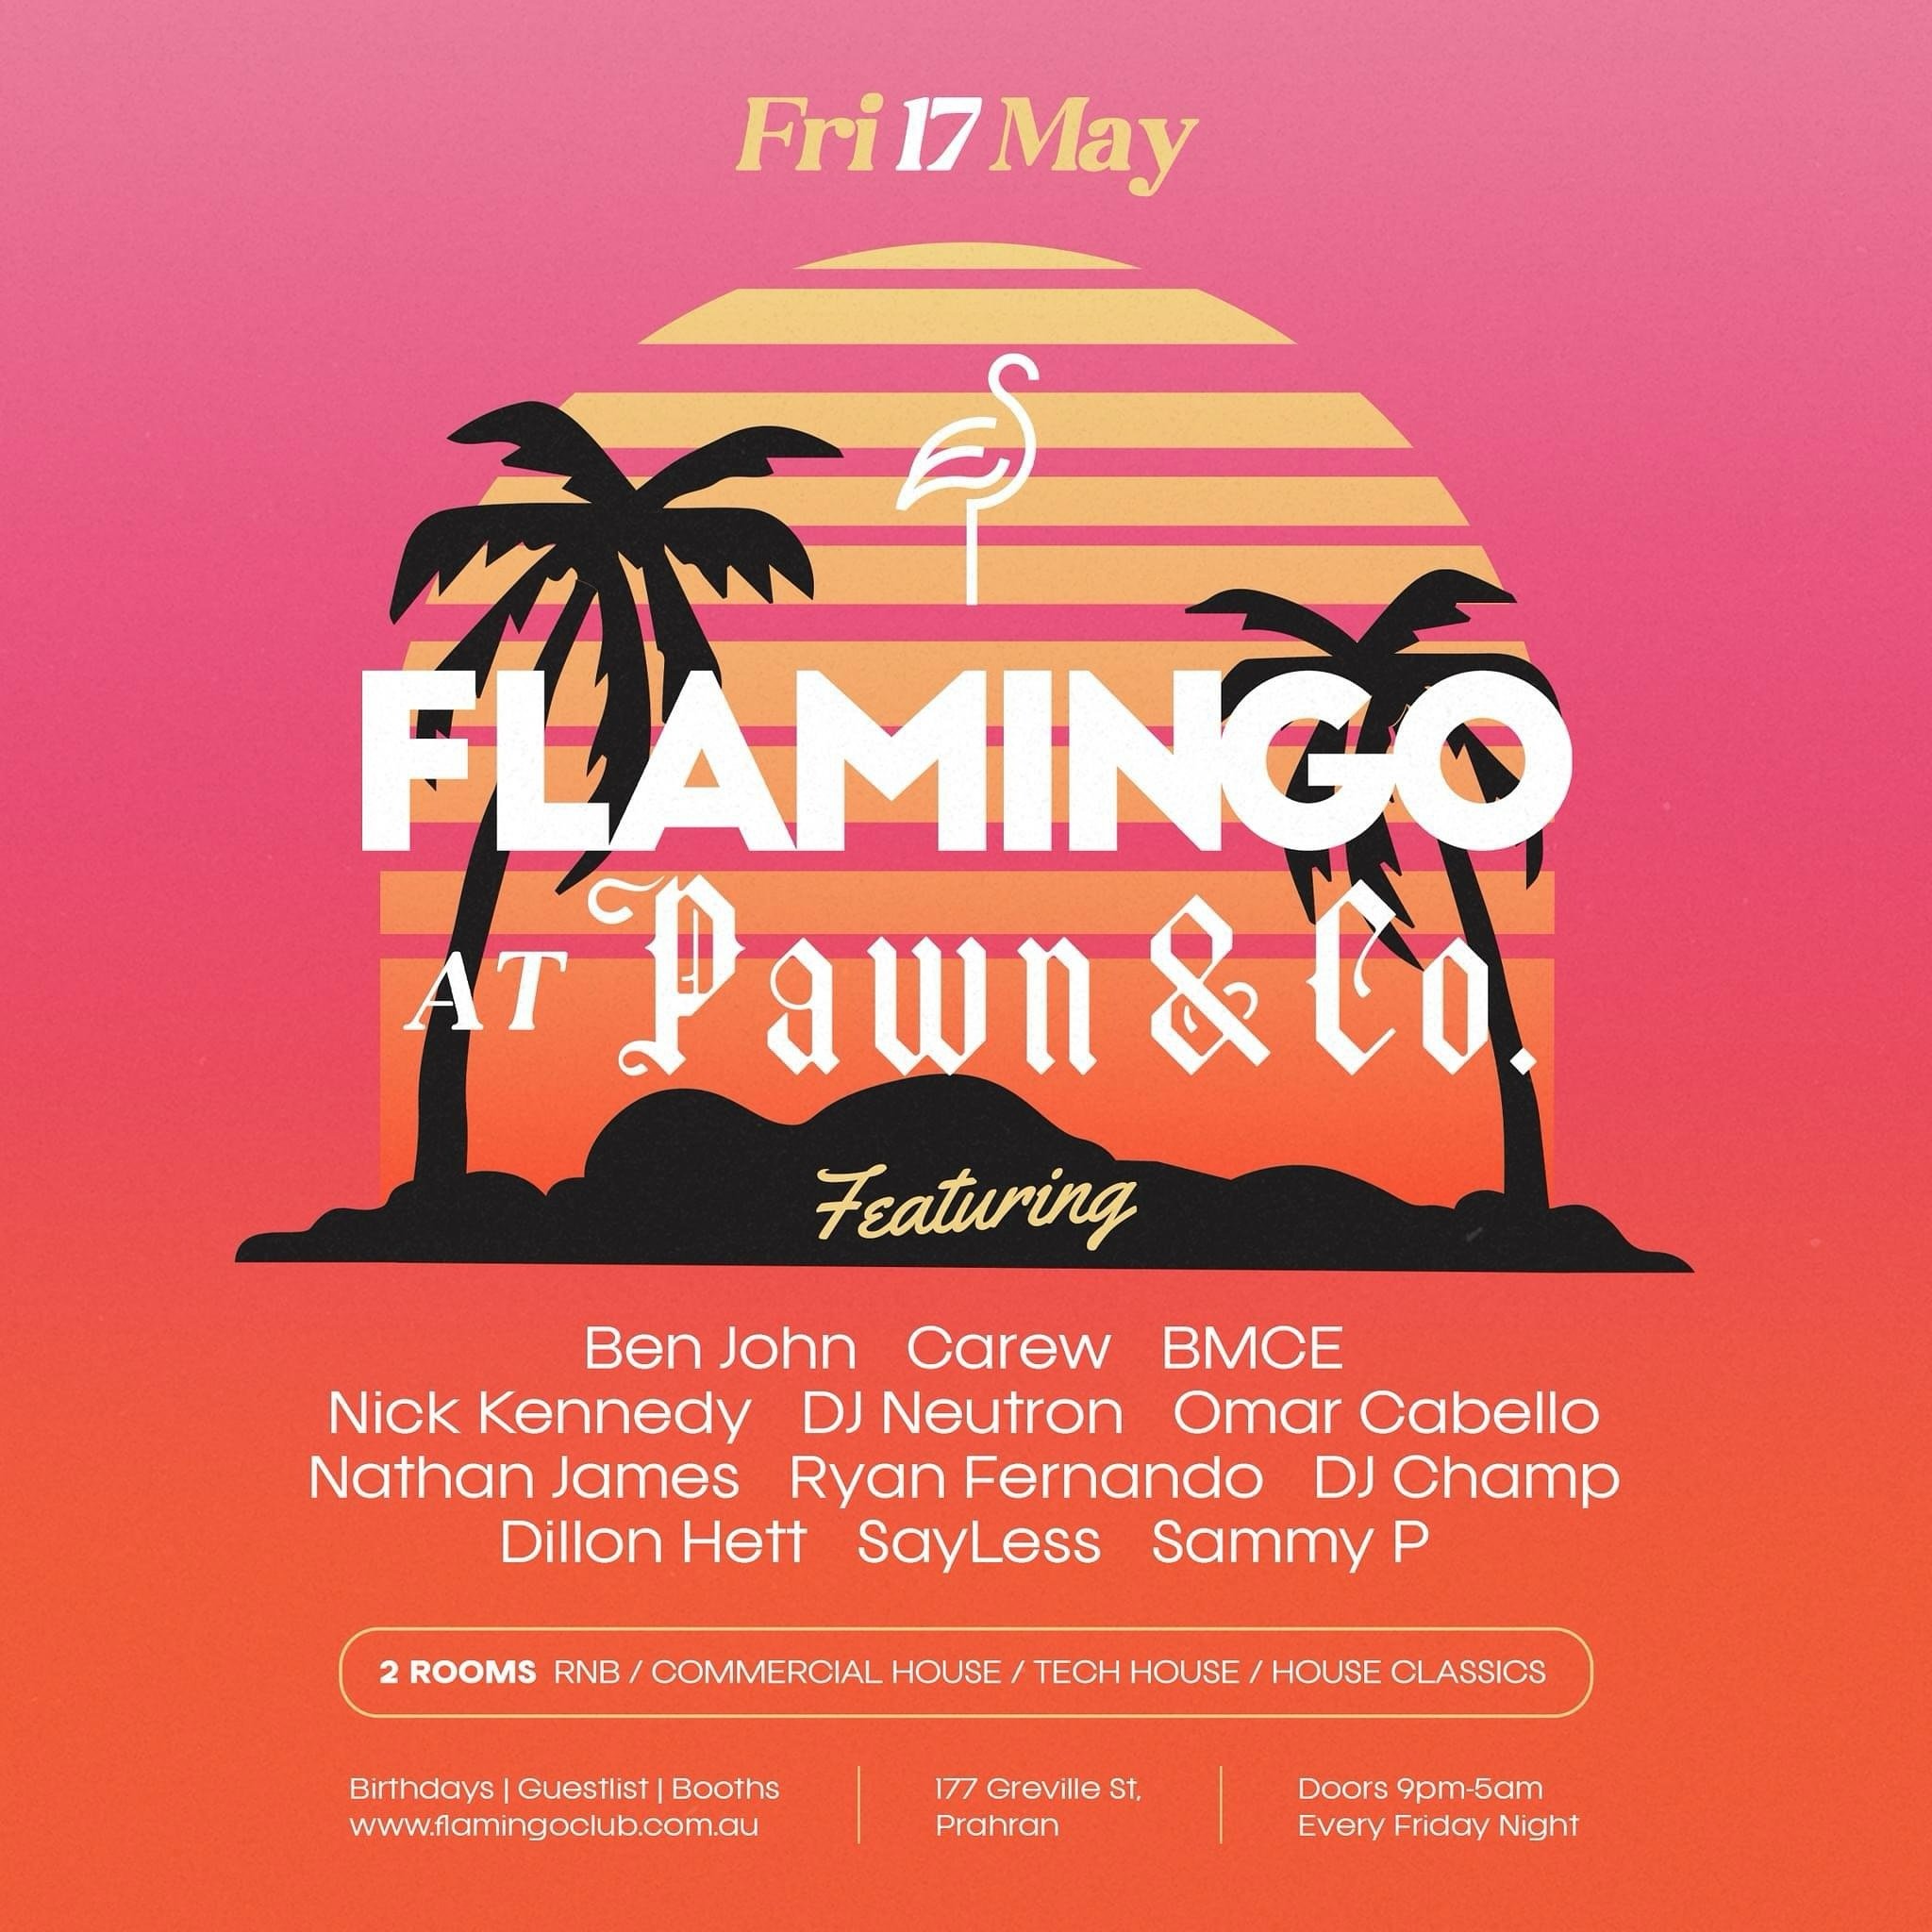 Join us this Friday at Flamingo Club at Pawn &amp; Co, where the vibe is always right and the nights unforgettable.🎉
This autumn has been fantastic, and we keep getting bigger and better every week🔥

Dance to your favourite beats across genres like